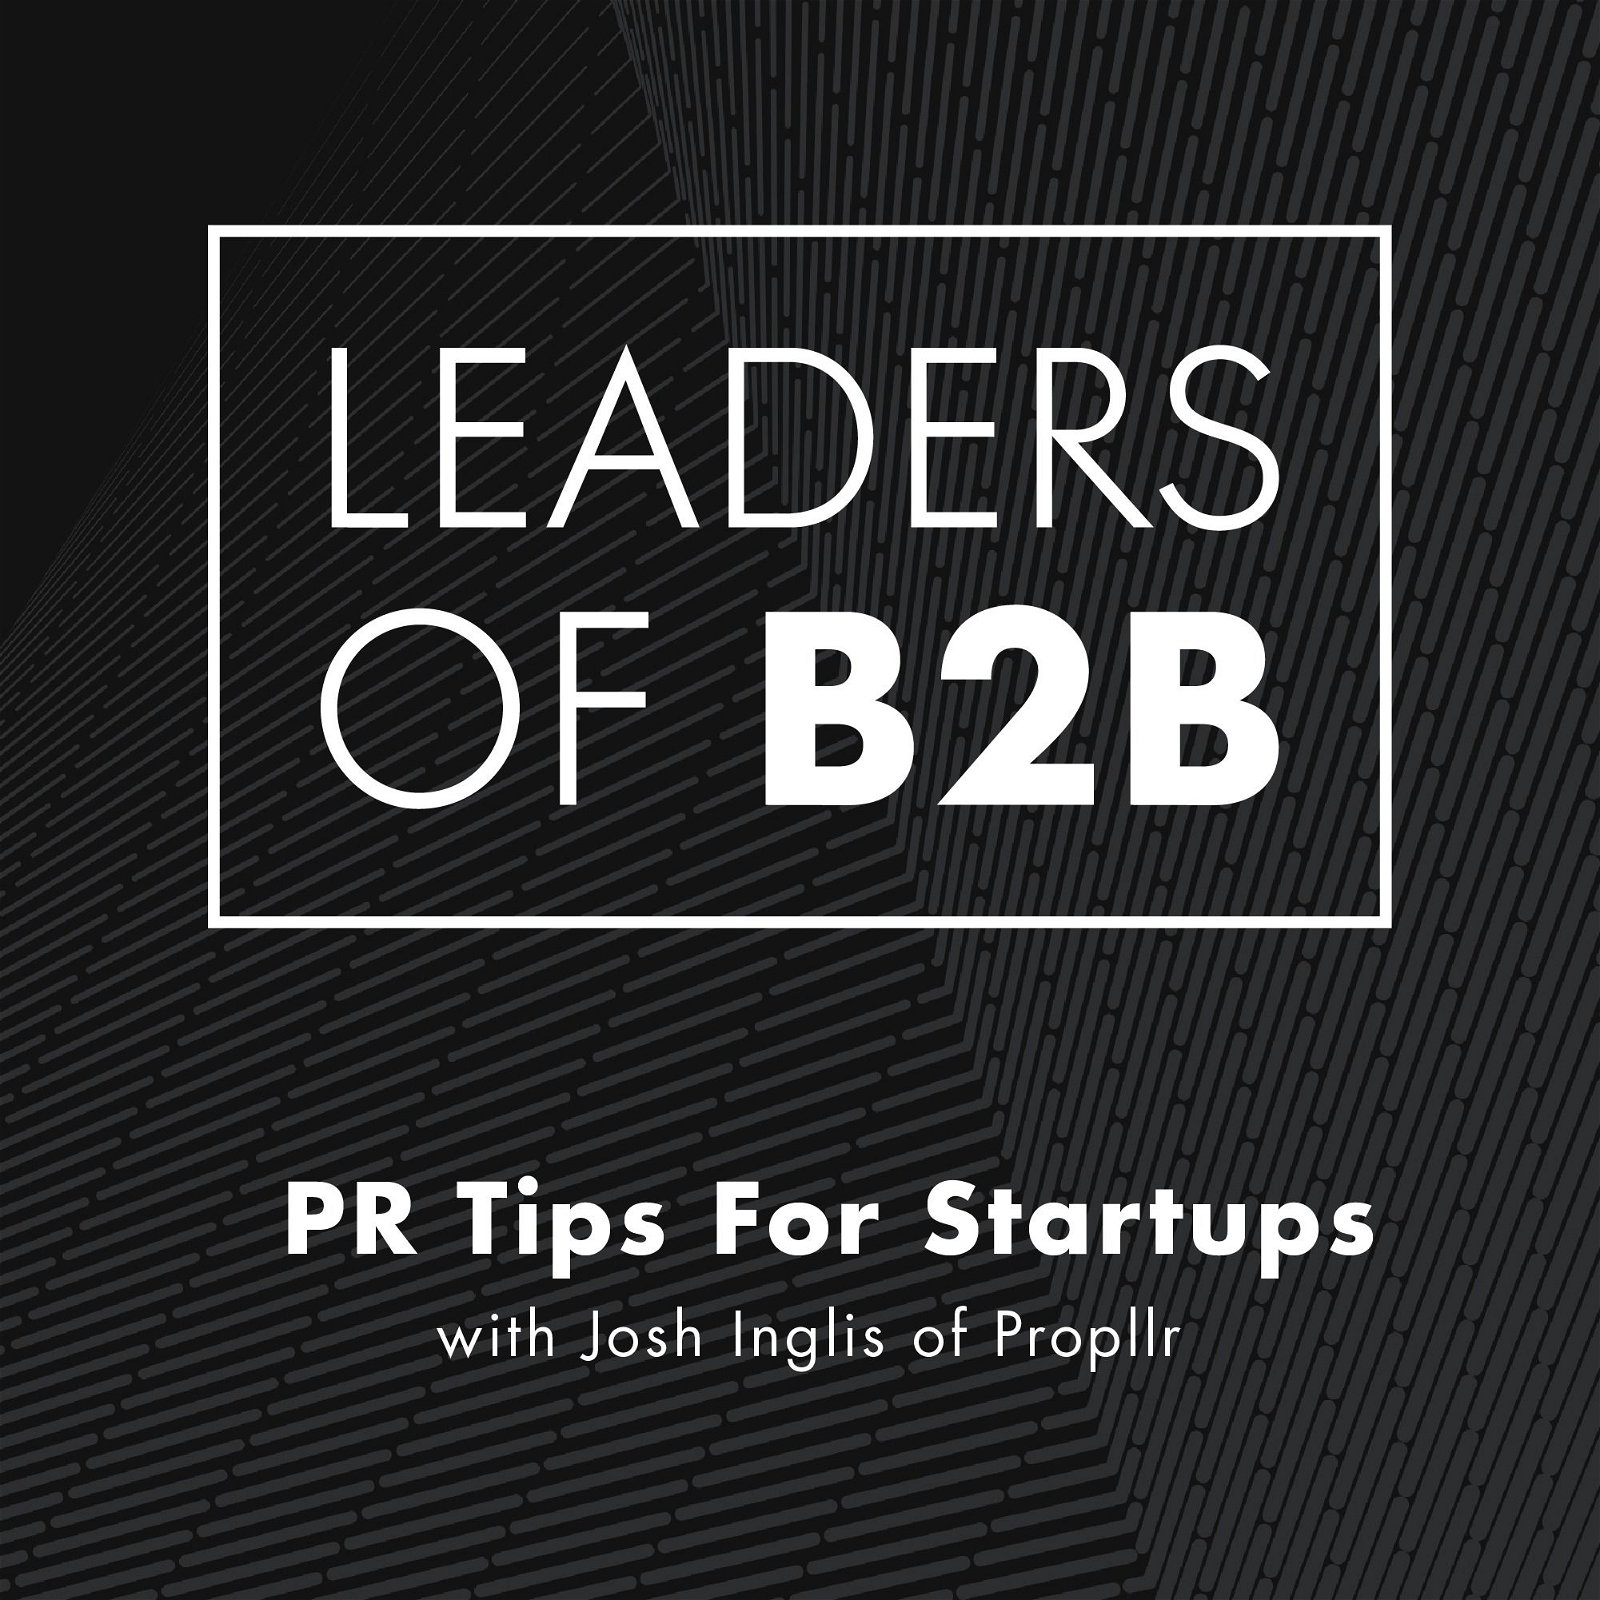 PR Tips For Startups, With Josh Inglis of Propllr